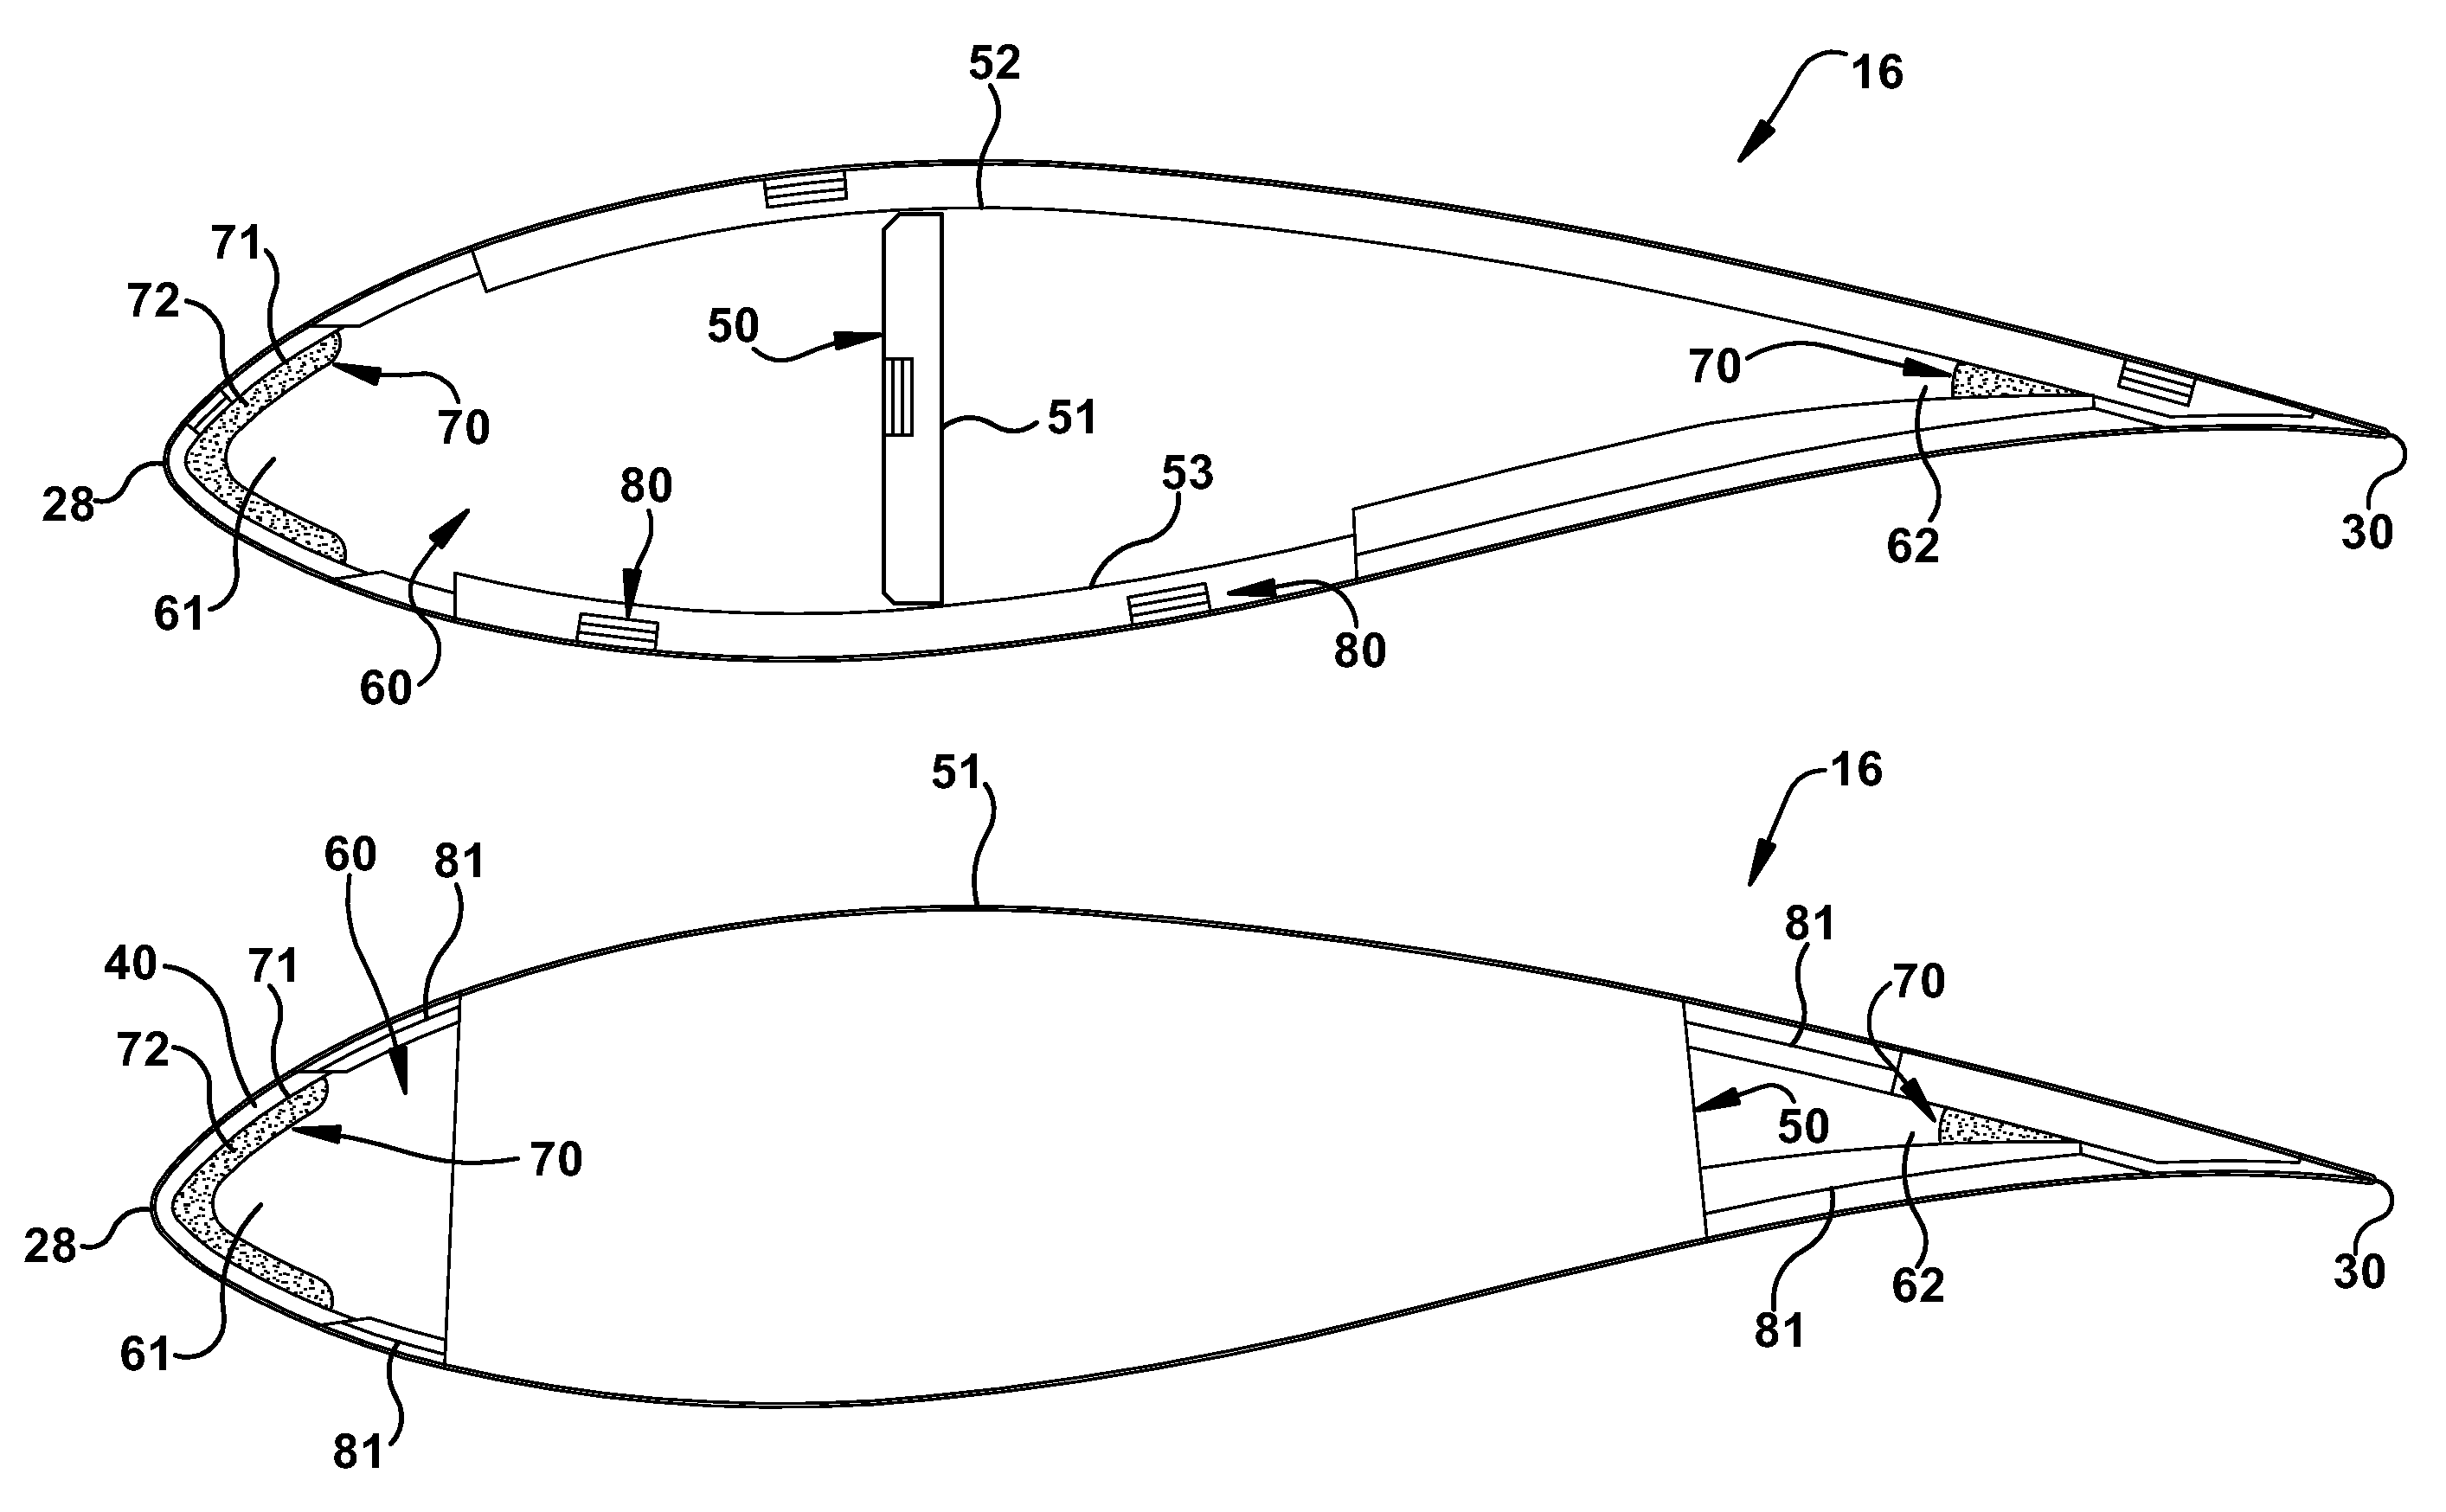 Wind turbine rotor blades with reduced radar cross sections